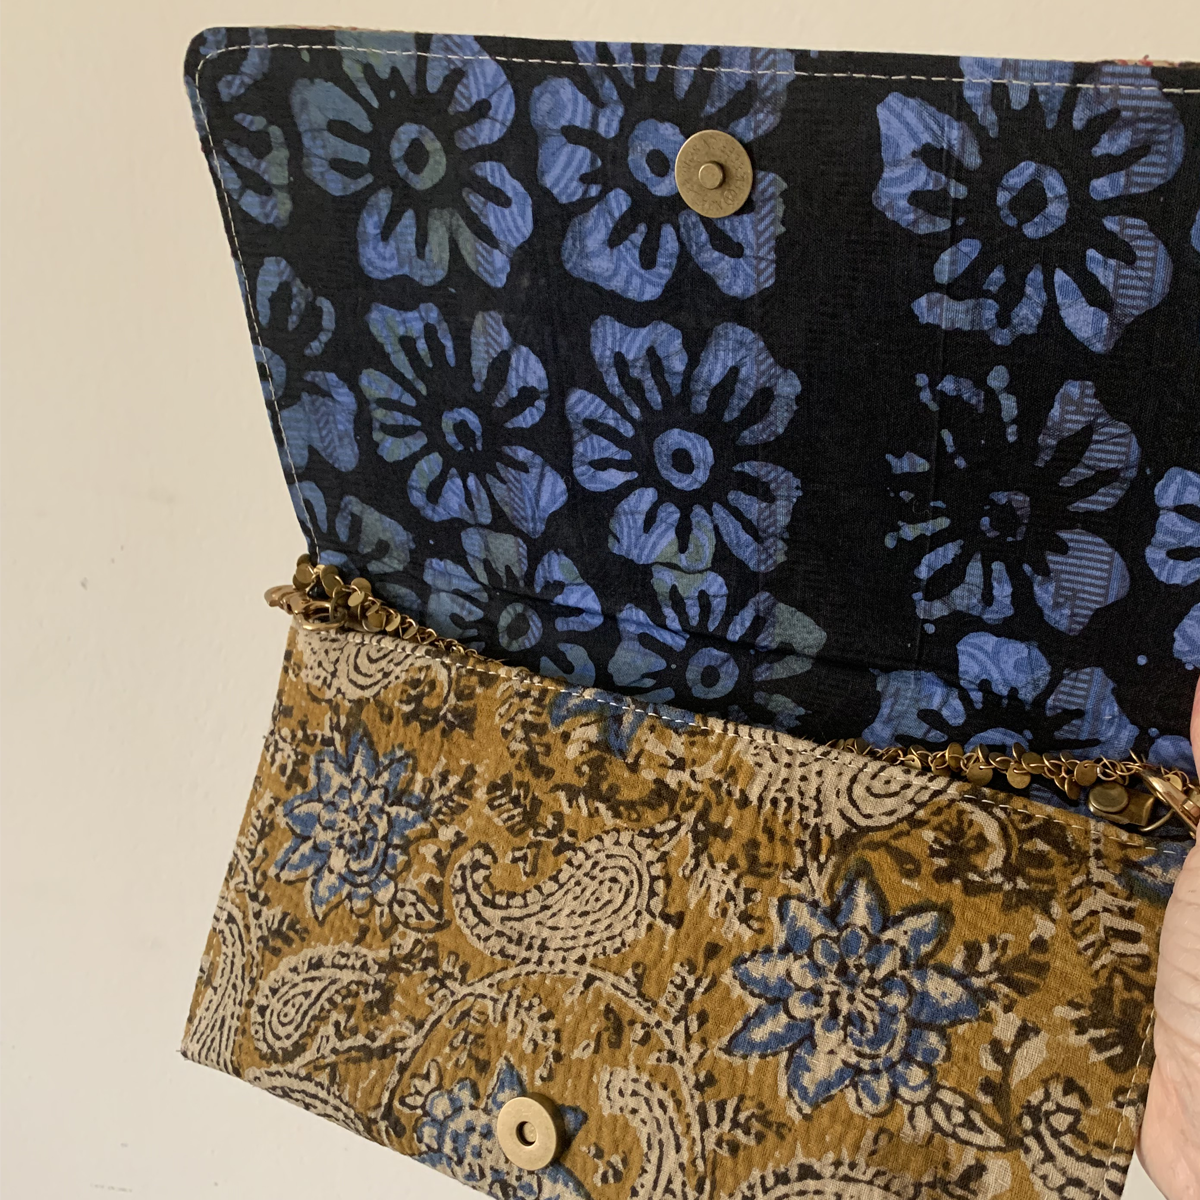 Ochre-Blue Kantha Star Clutch: A Handcrafted Celebration of Traditional Textiles